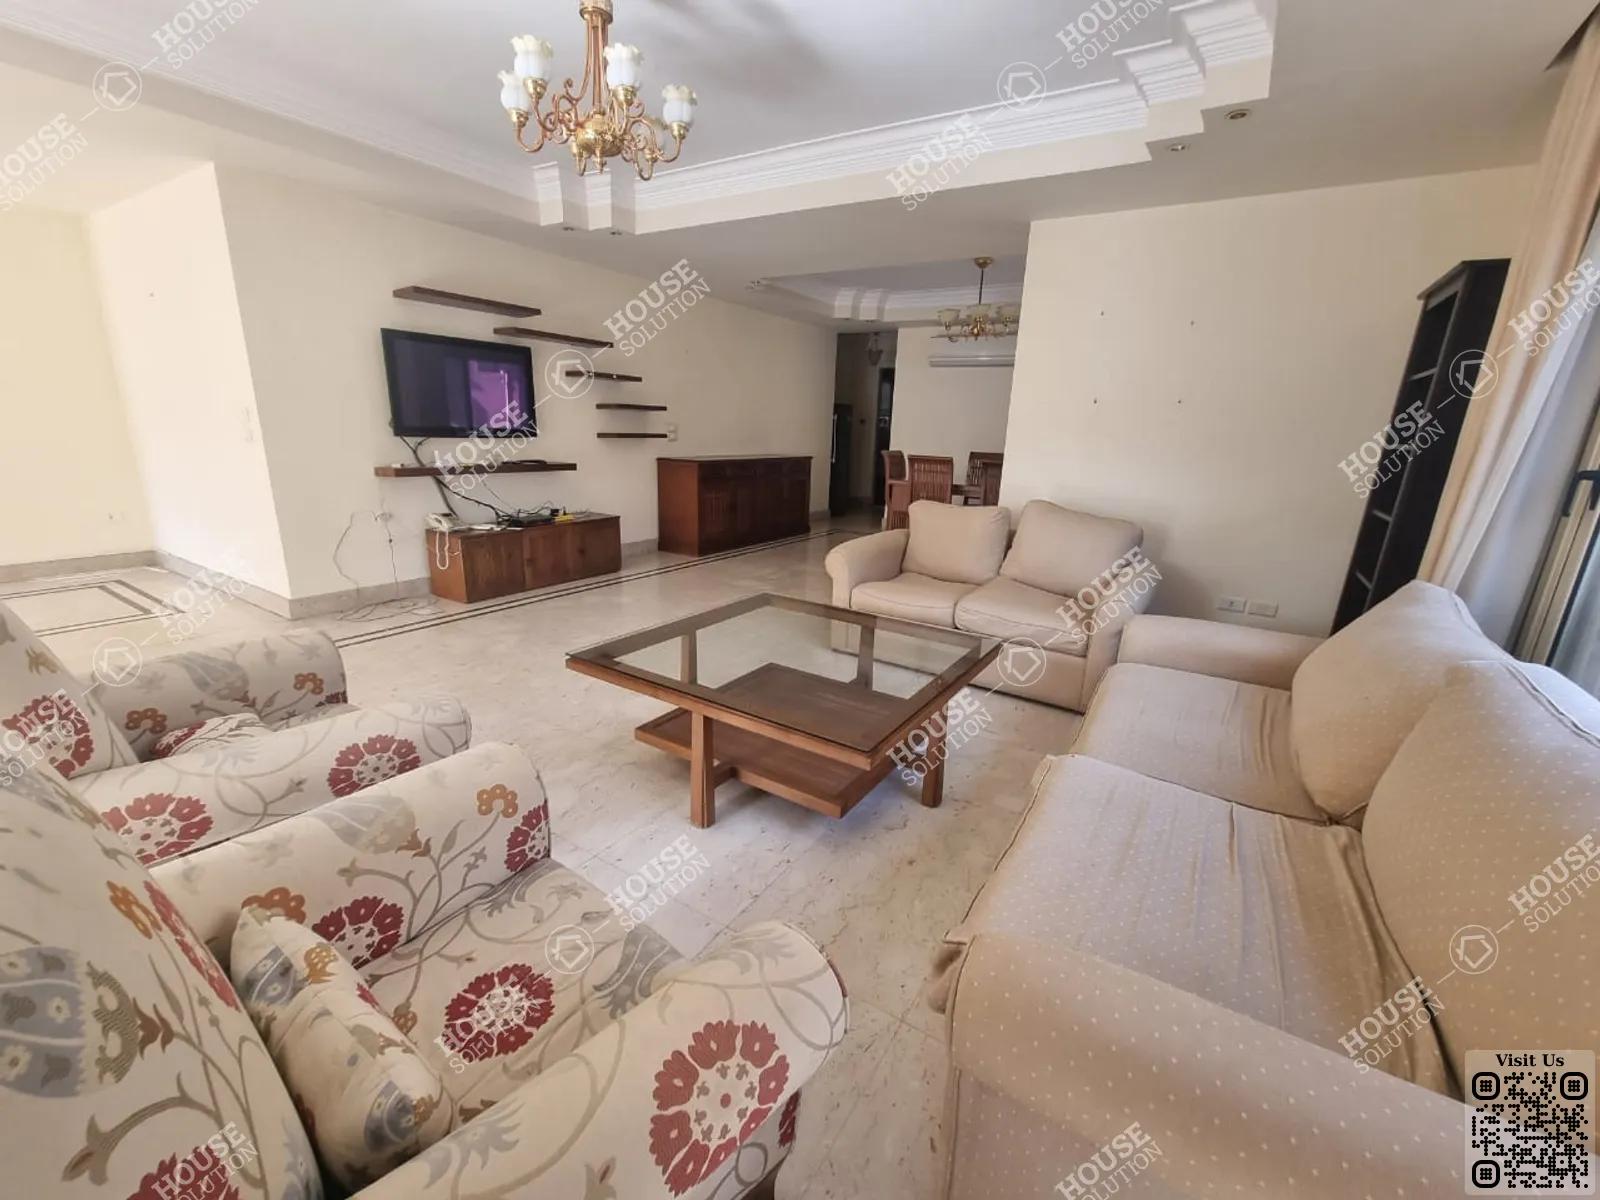 RECEPTION  @ Apartments For Rent In Maadi Maadi Degla Area: 180 m² consists of 4 Bedrooms 4 Bathrooms Modern furnished 5 stars #5625-2